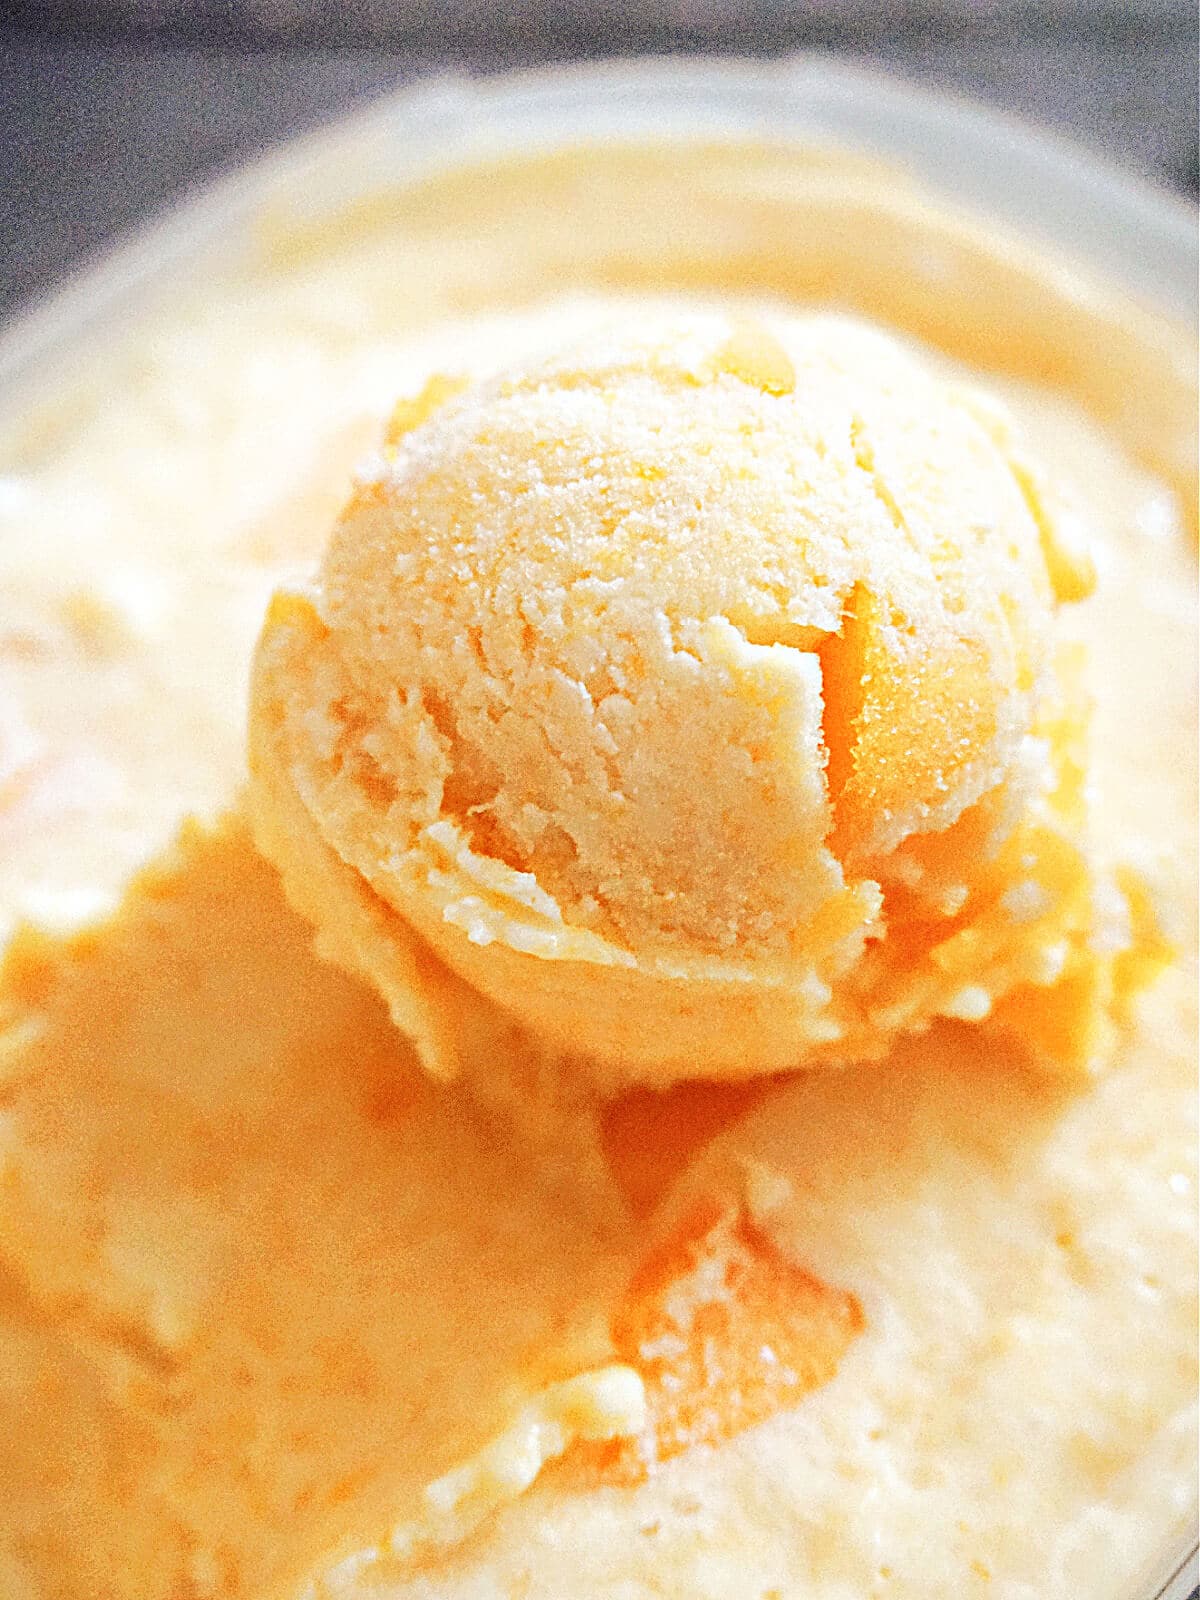 A scoop of peach ice cream in an in ice cream tub